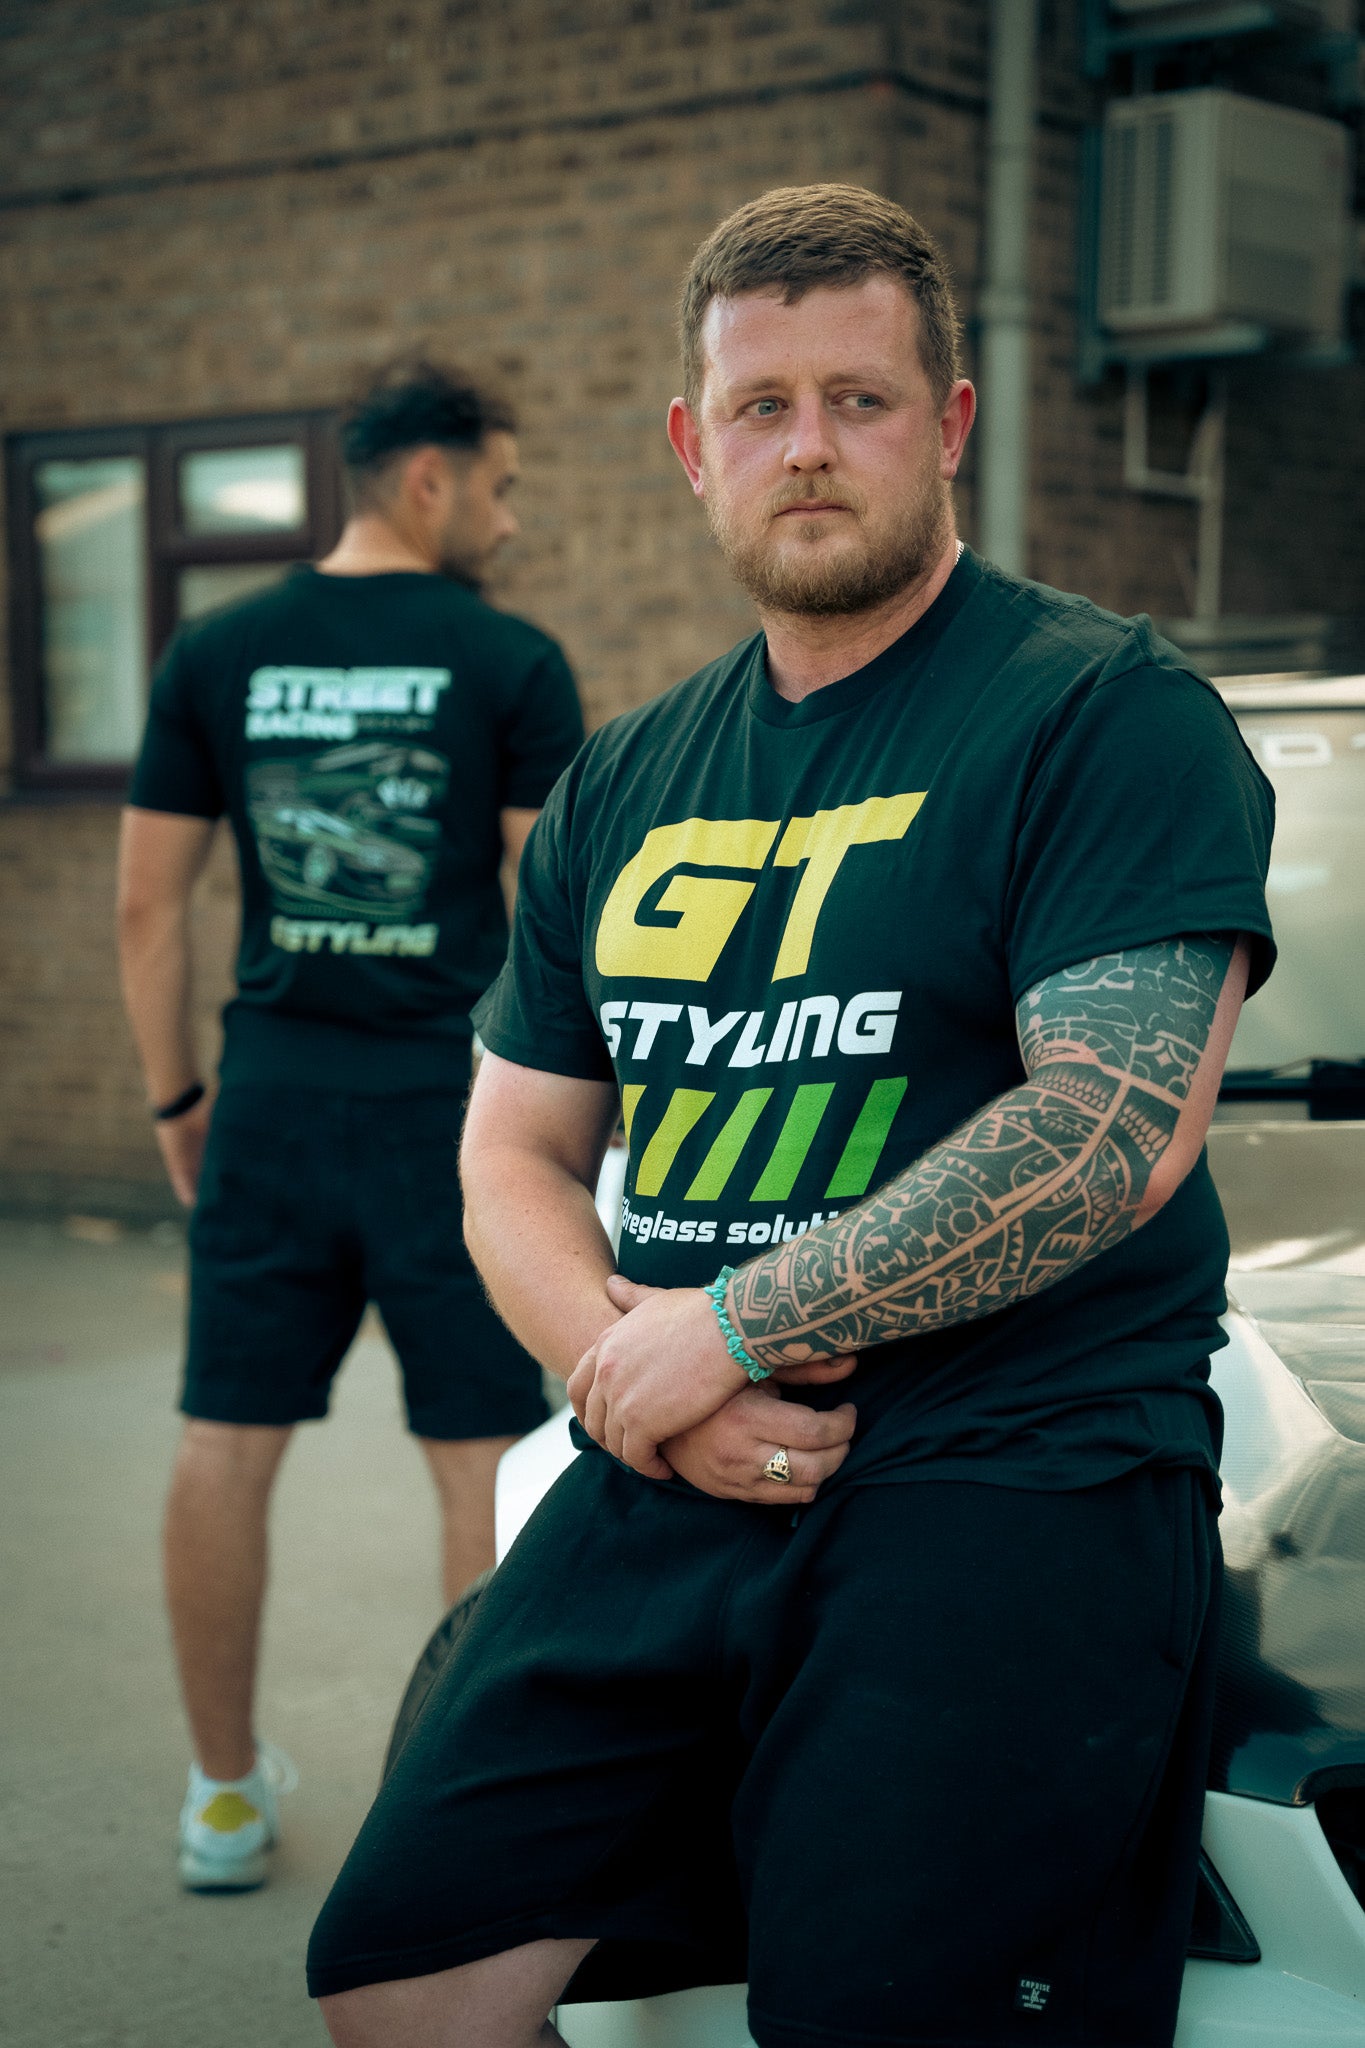 'Flagship' T-Shirt by GT STYLING UK